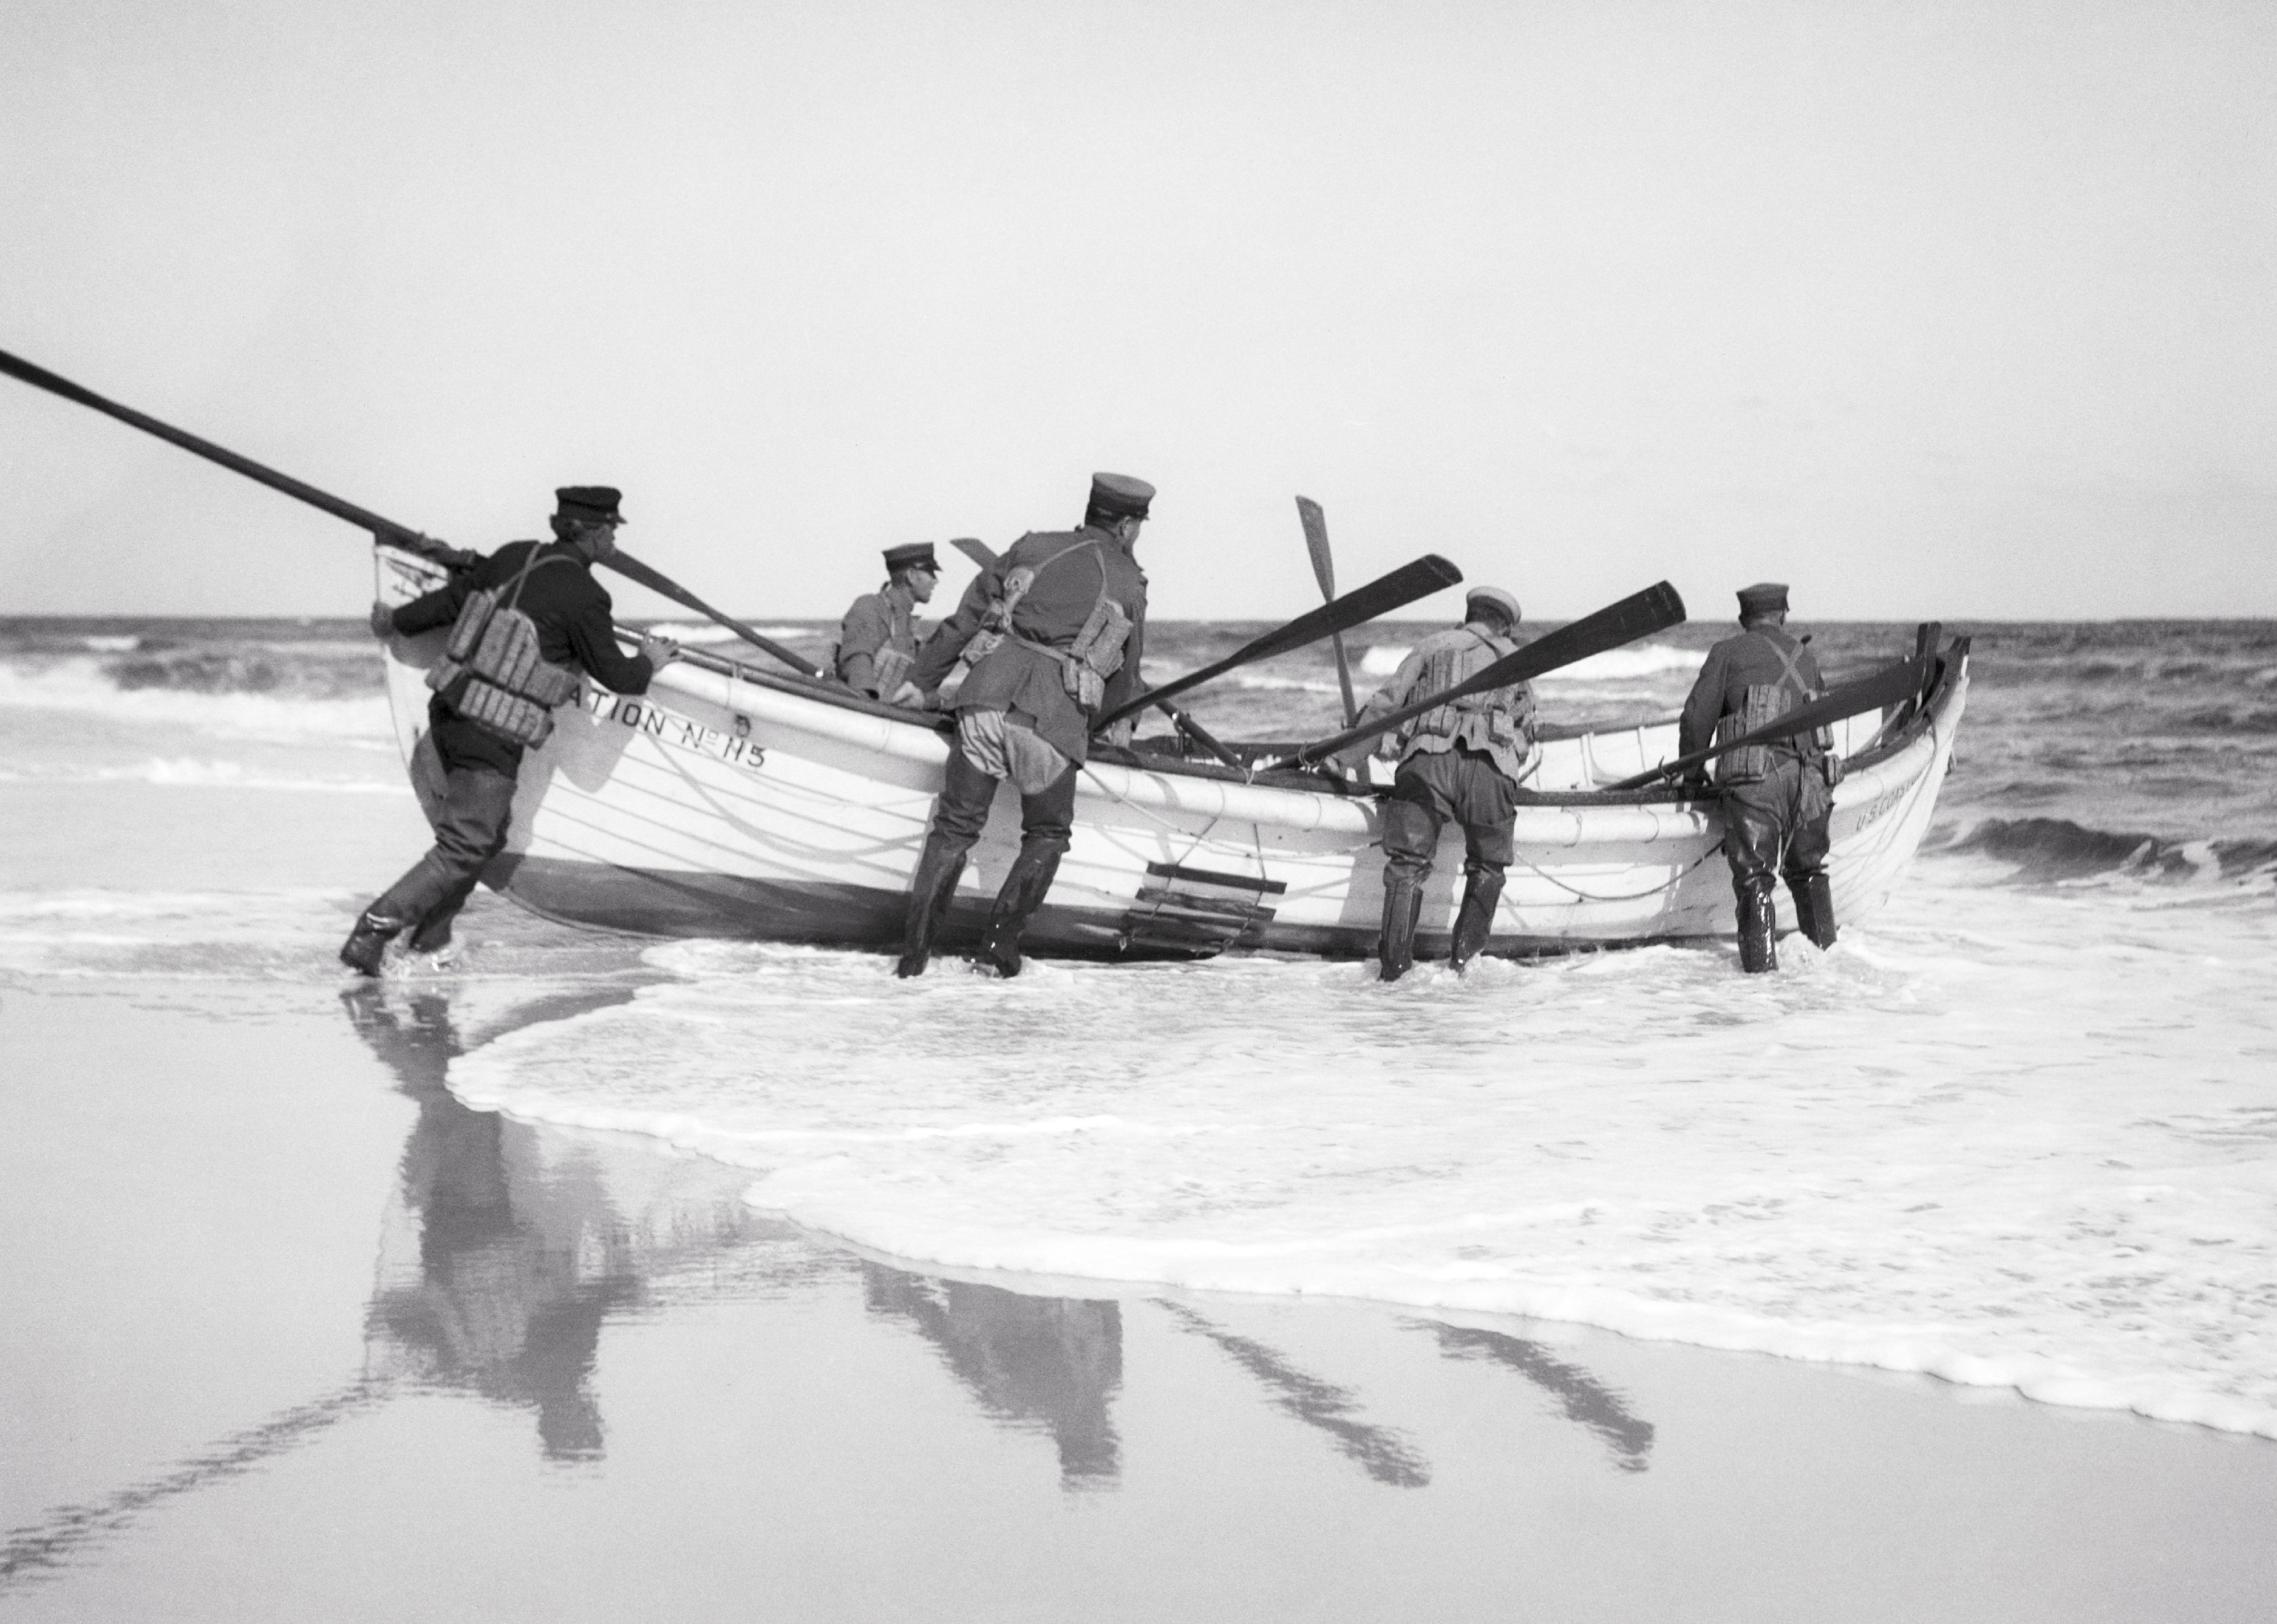 U.S. Coast Guard launching a wooden rescue boat on the beach.